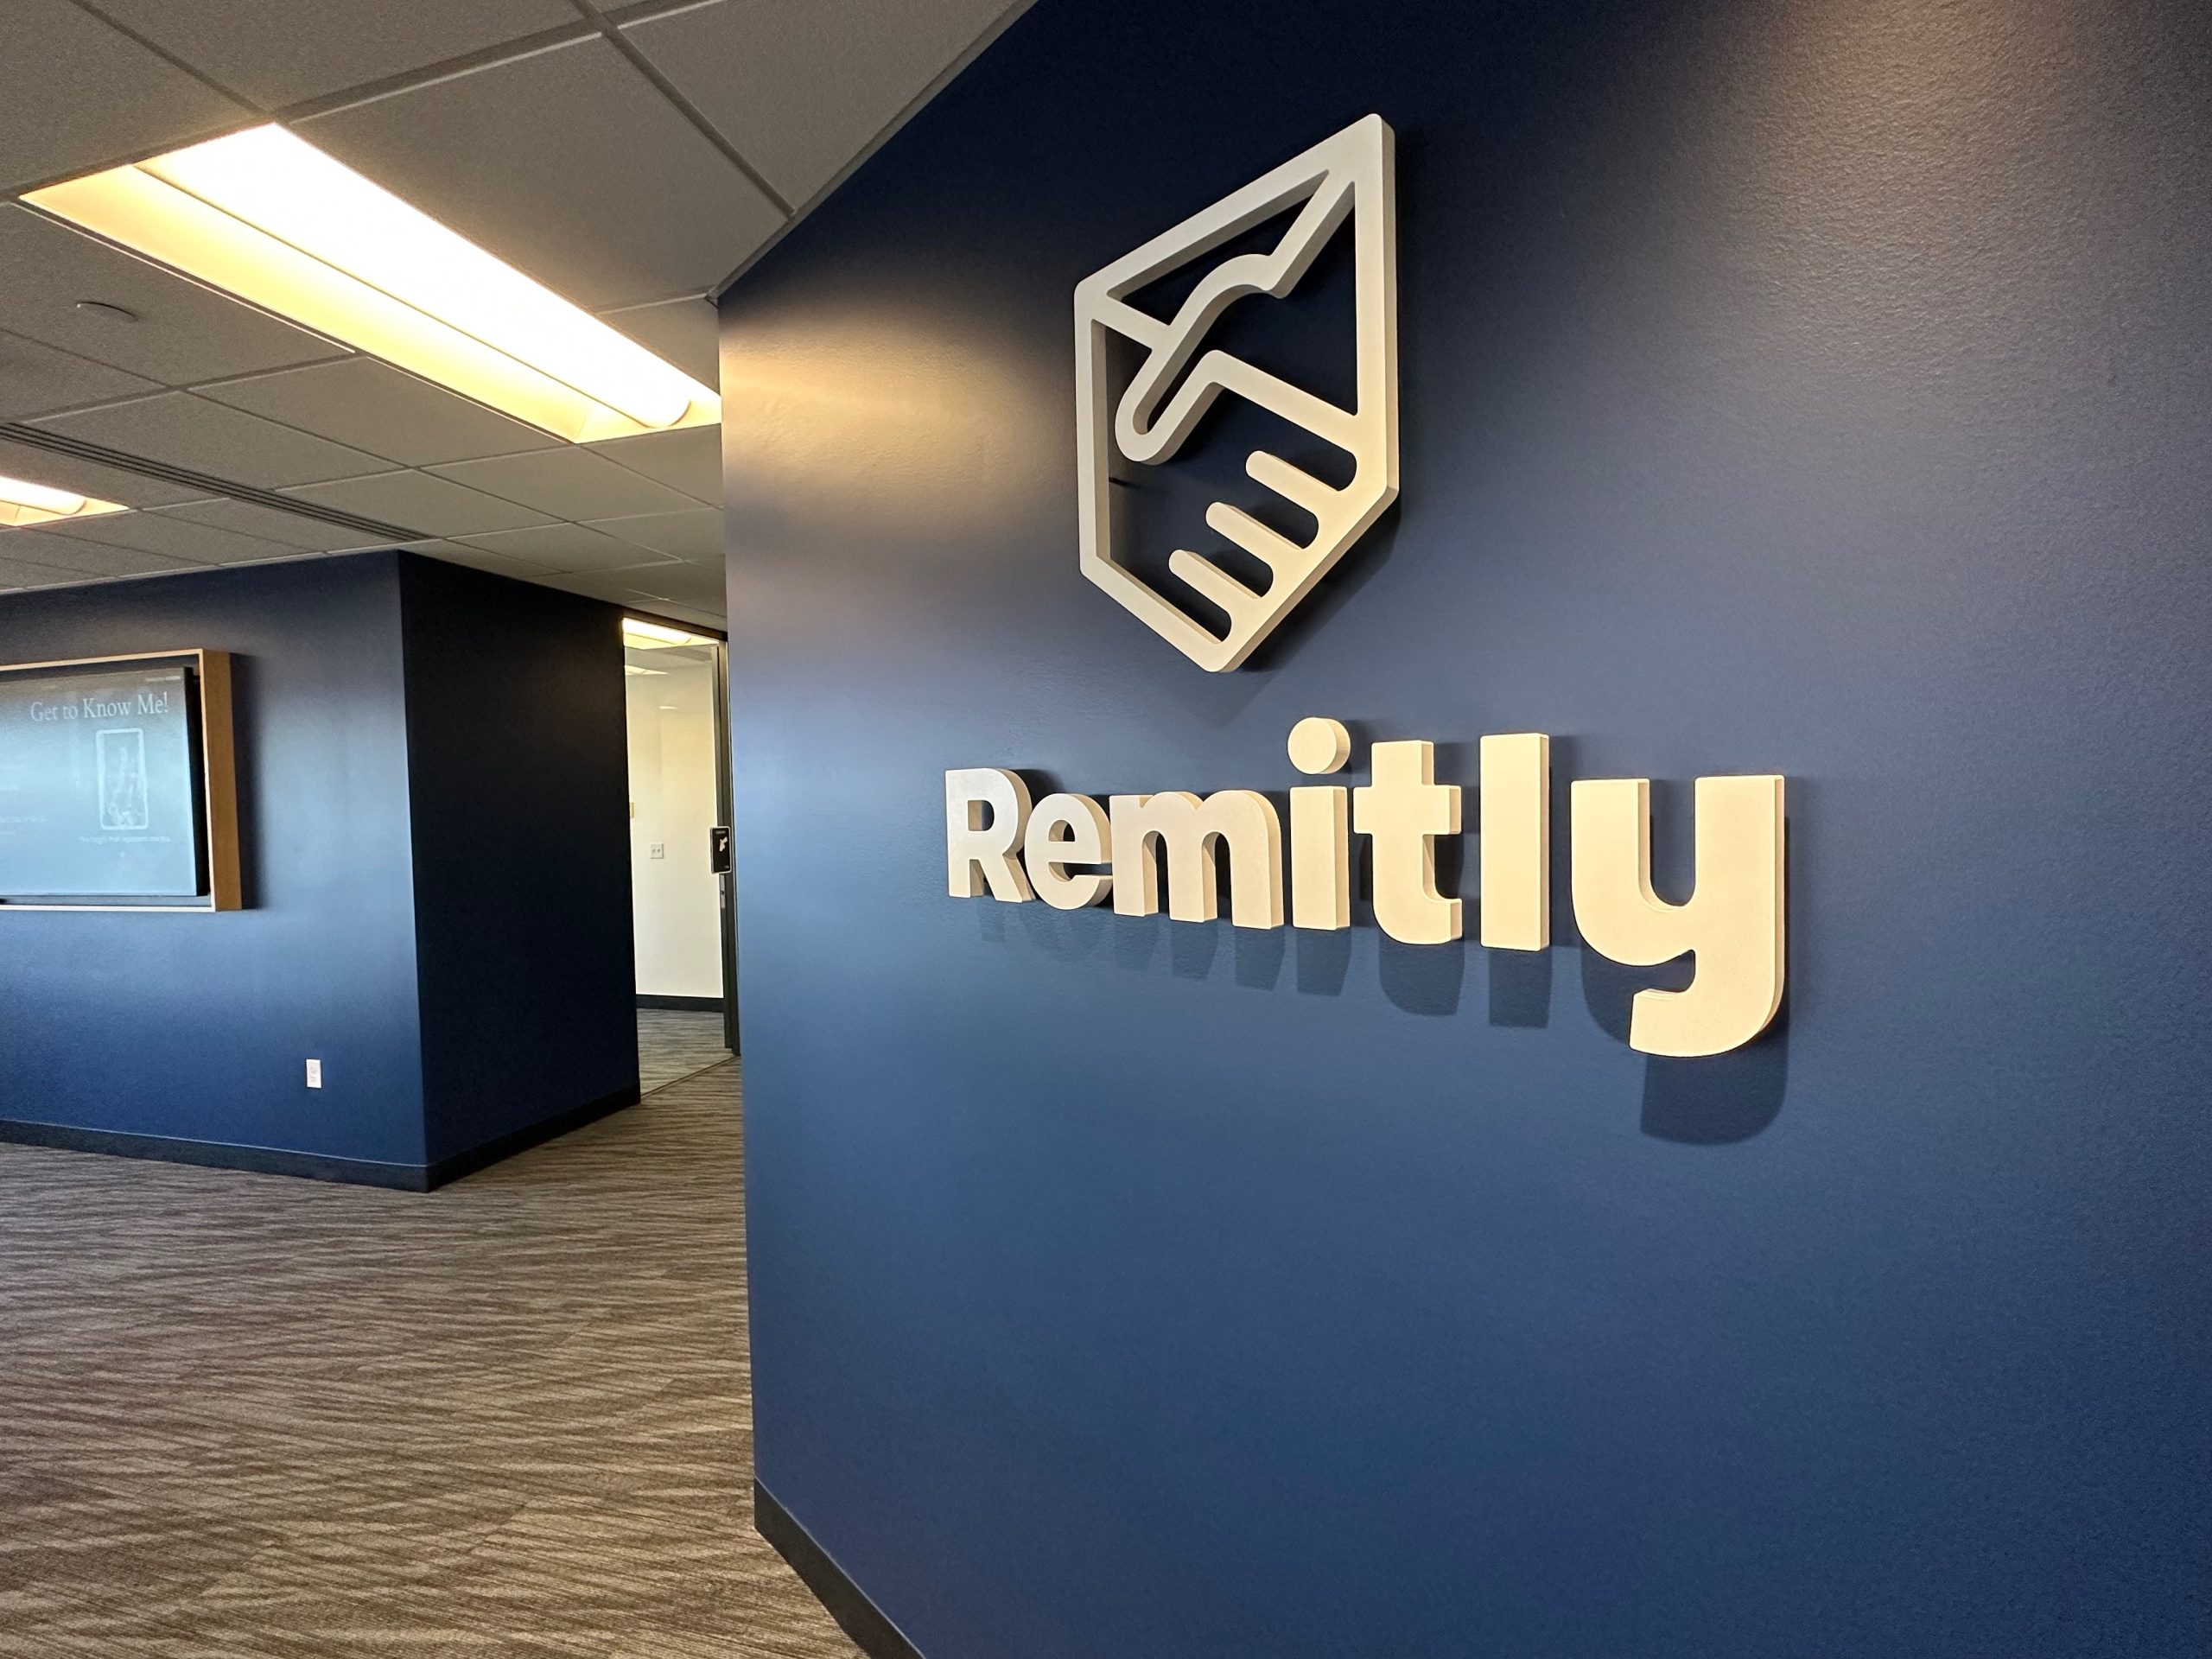 Remitly Website Review: A Convenient Way to Send Money Online Worldwide